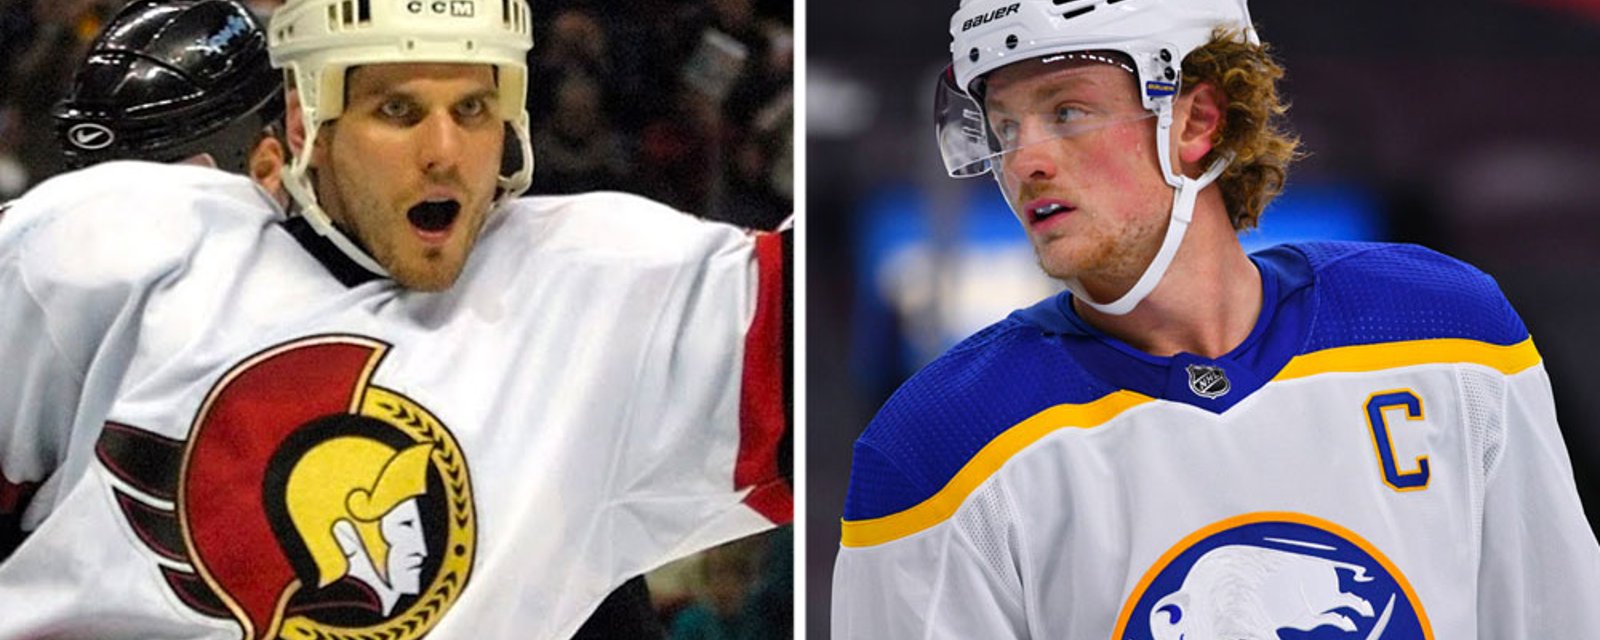 Breach of contract coming to end Eichel vs Sabres stalemate?